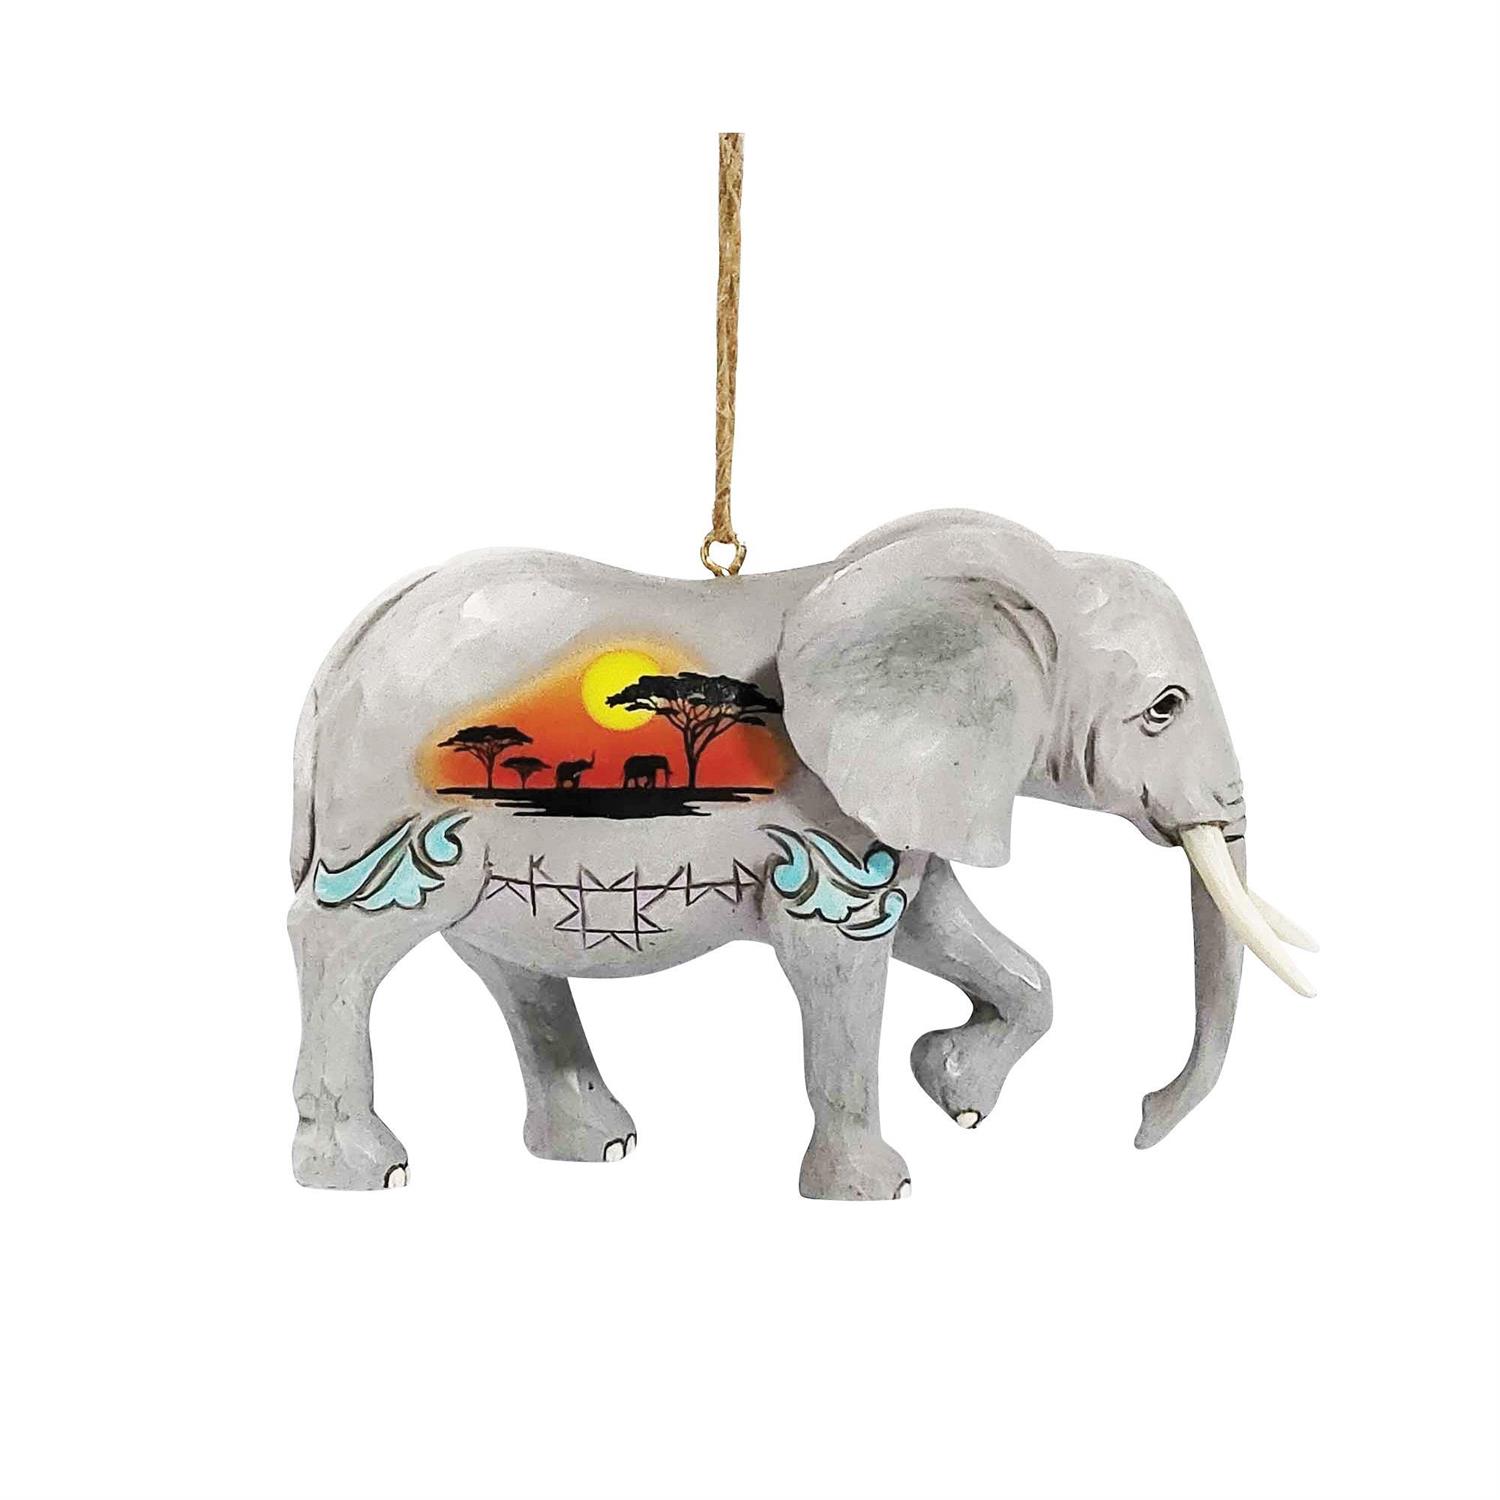 Enesco Gifts Jim Shore Animal Planet African Elephant Ornament Free Shipping Iveys Gifts And Decor